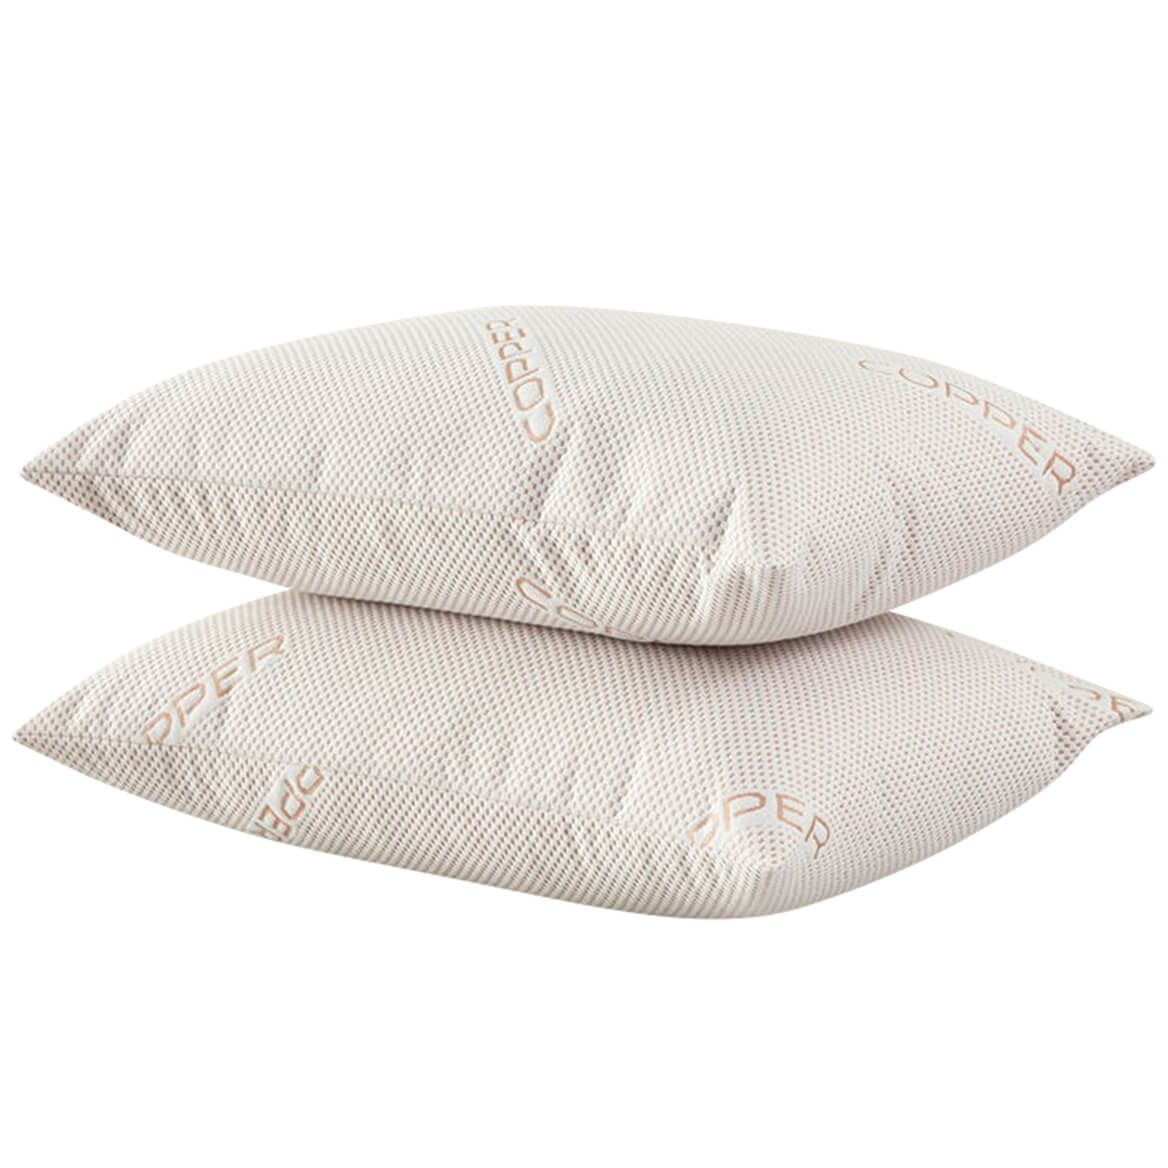 Copper-Infused Pillow Covers by OakRidge™, Set of 2 + '-' + 374634